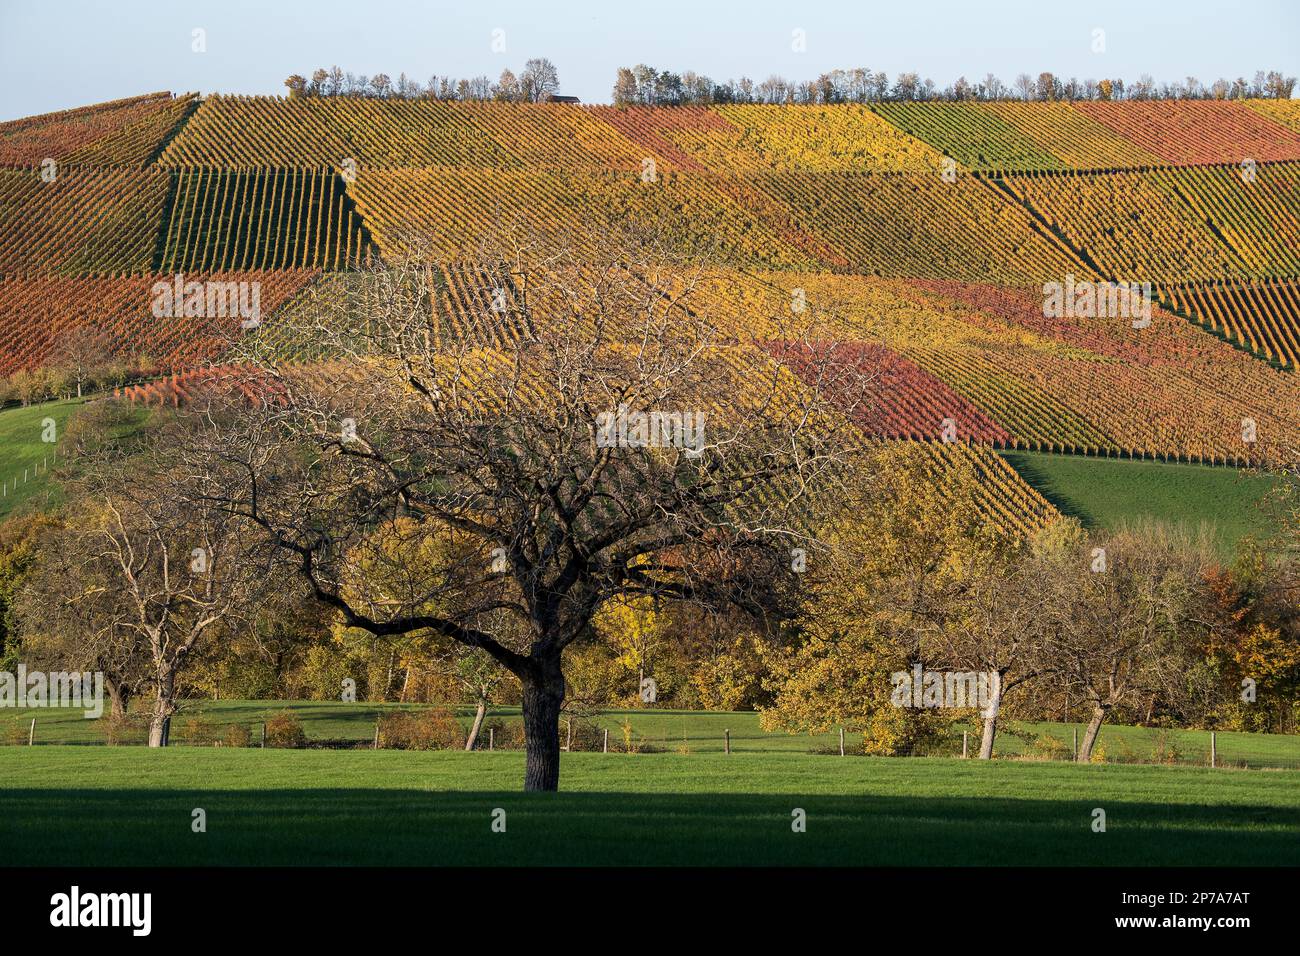 Drone image, vineyards in autumn, near Michelbach, Baden-Wuerttemberg, Germany Stock Photo